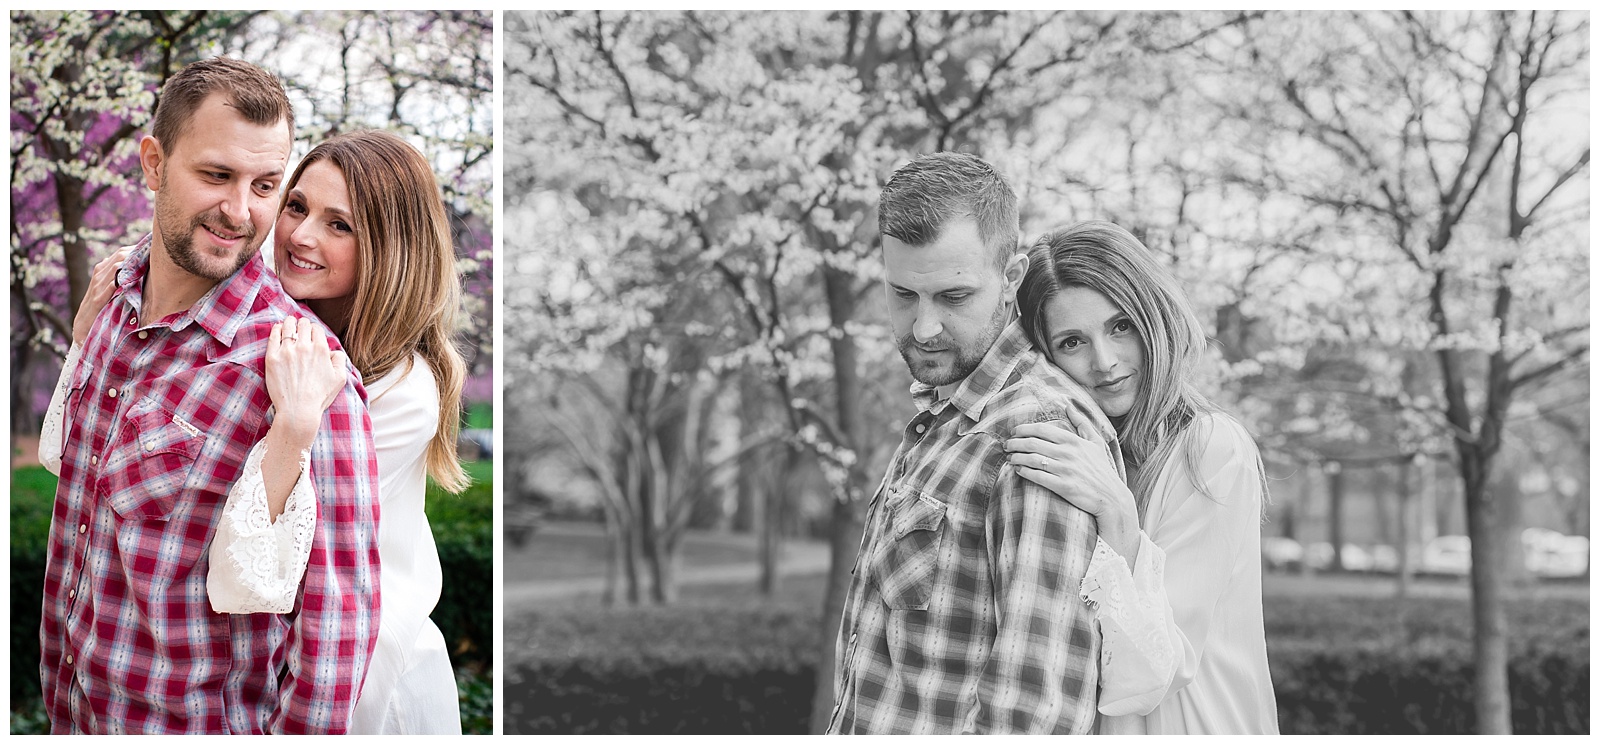 Engagement photography at the Nelson-Atkins Museum of Art by Wisdom-Watson Weddings.